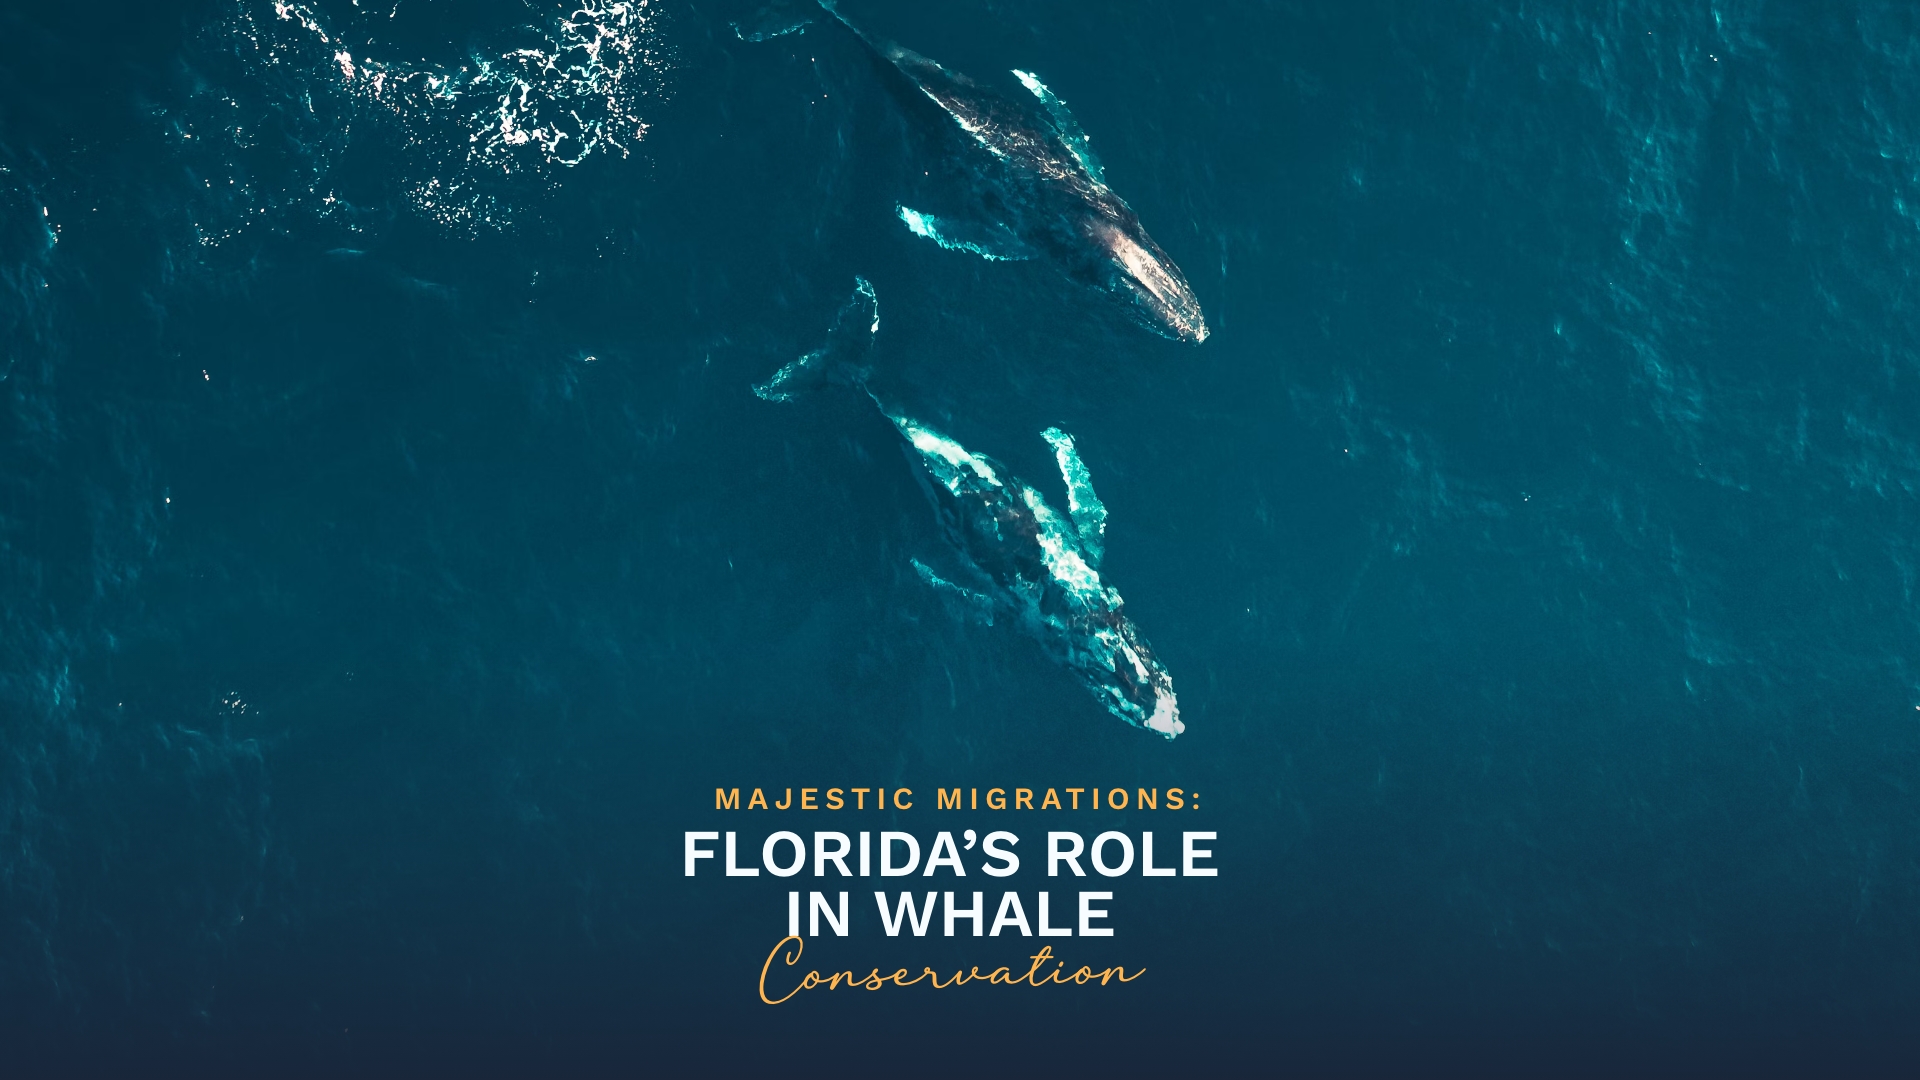 Prime Luxury Rentals - Majestic Migrations: Florida’s Role in Whale Conservation